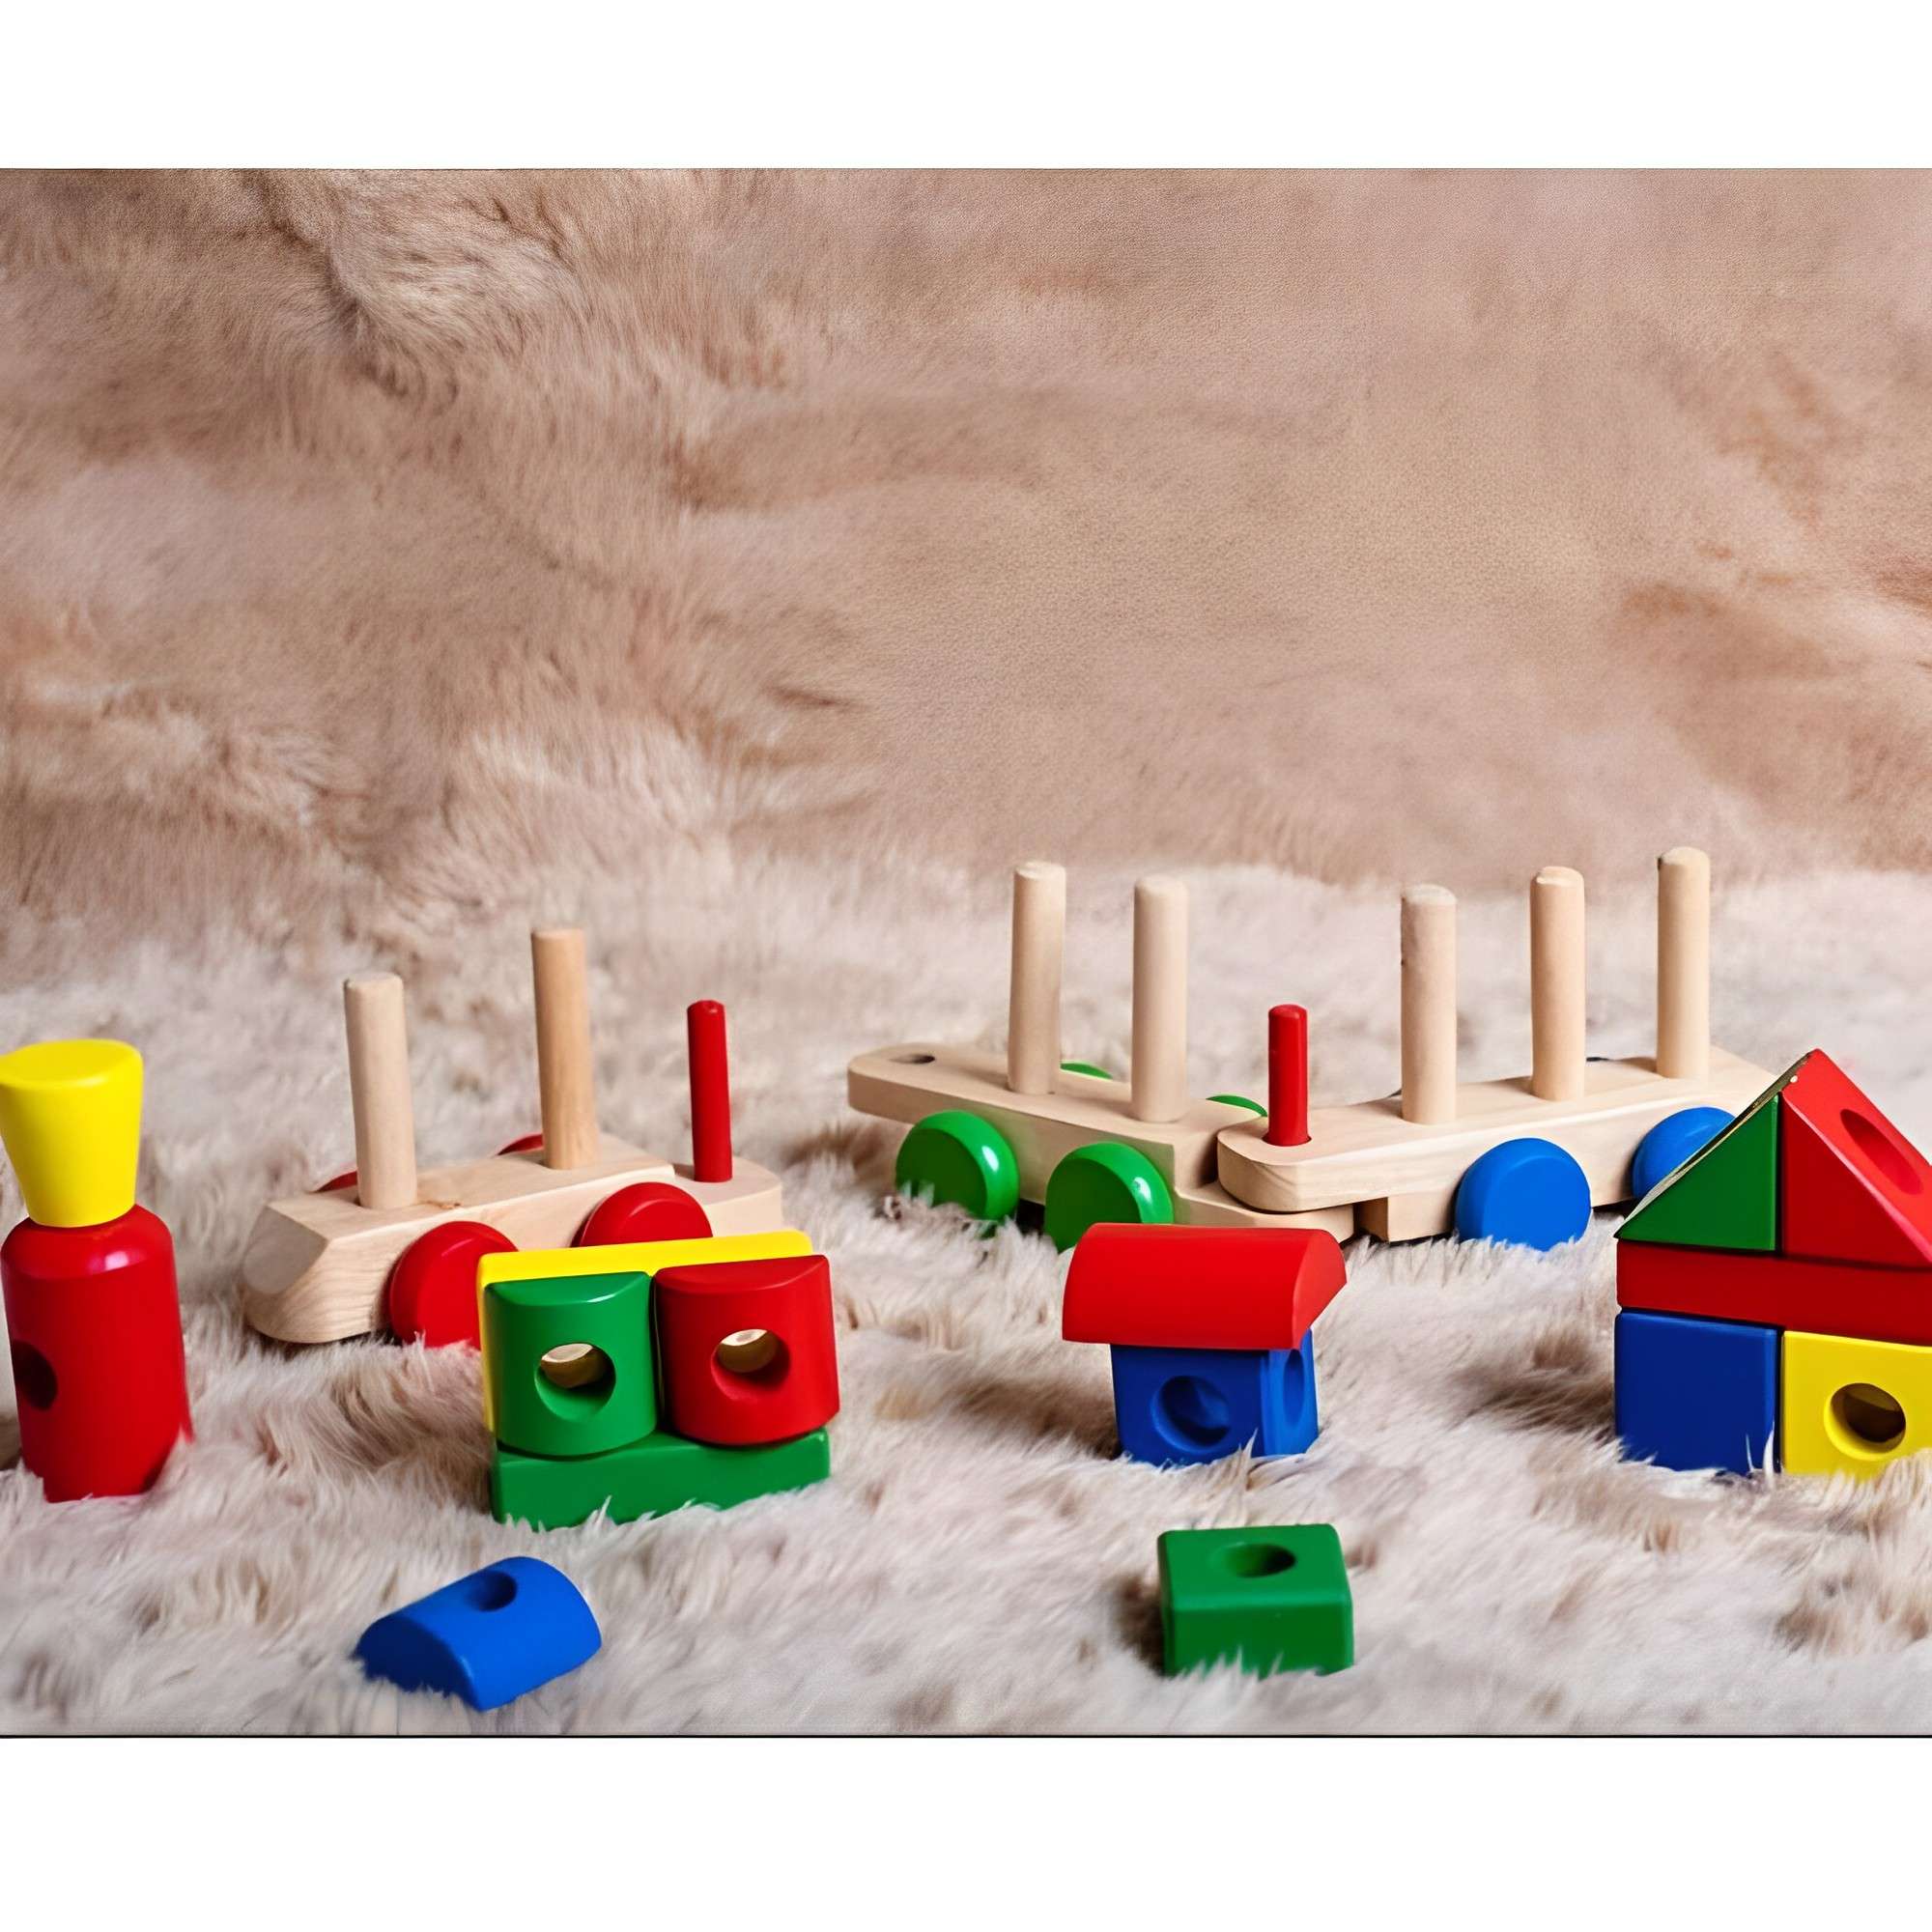 Wooden Blocks Train Educational Toys For 3 Year Olds, Montessori Toys For 3 Year Olds